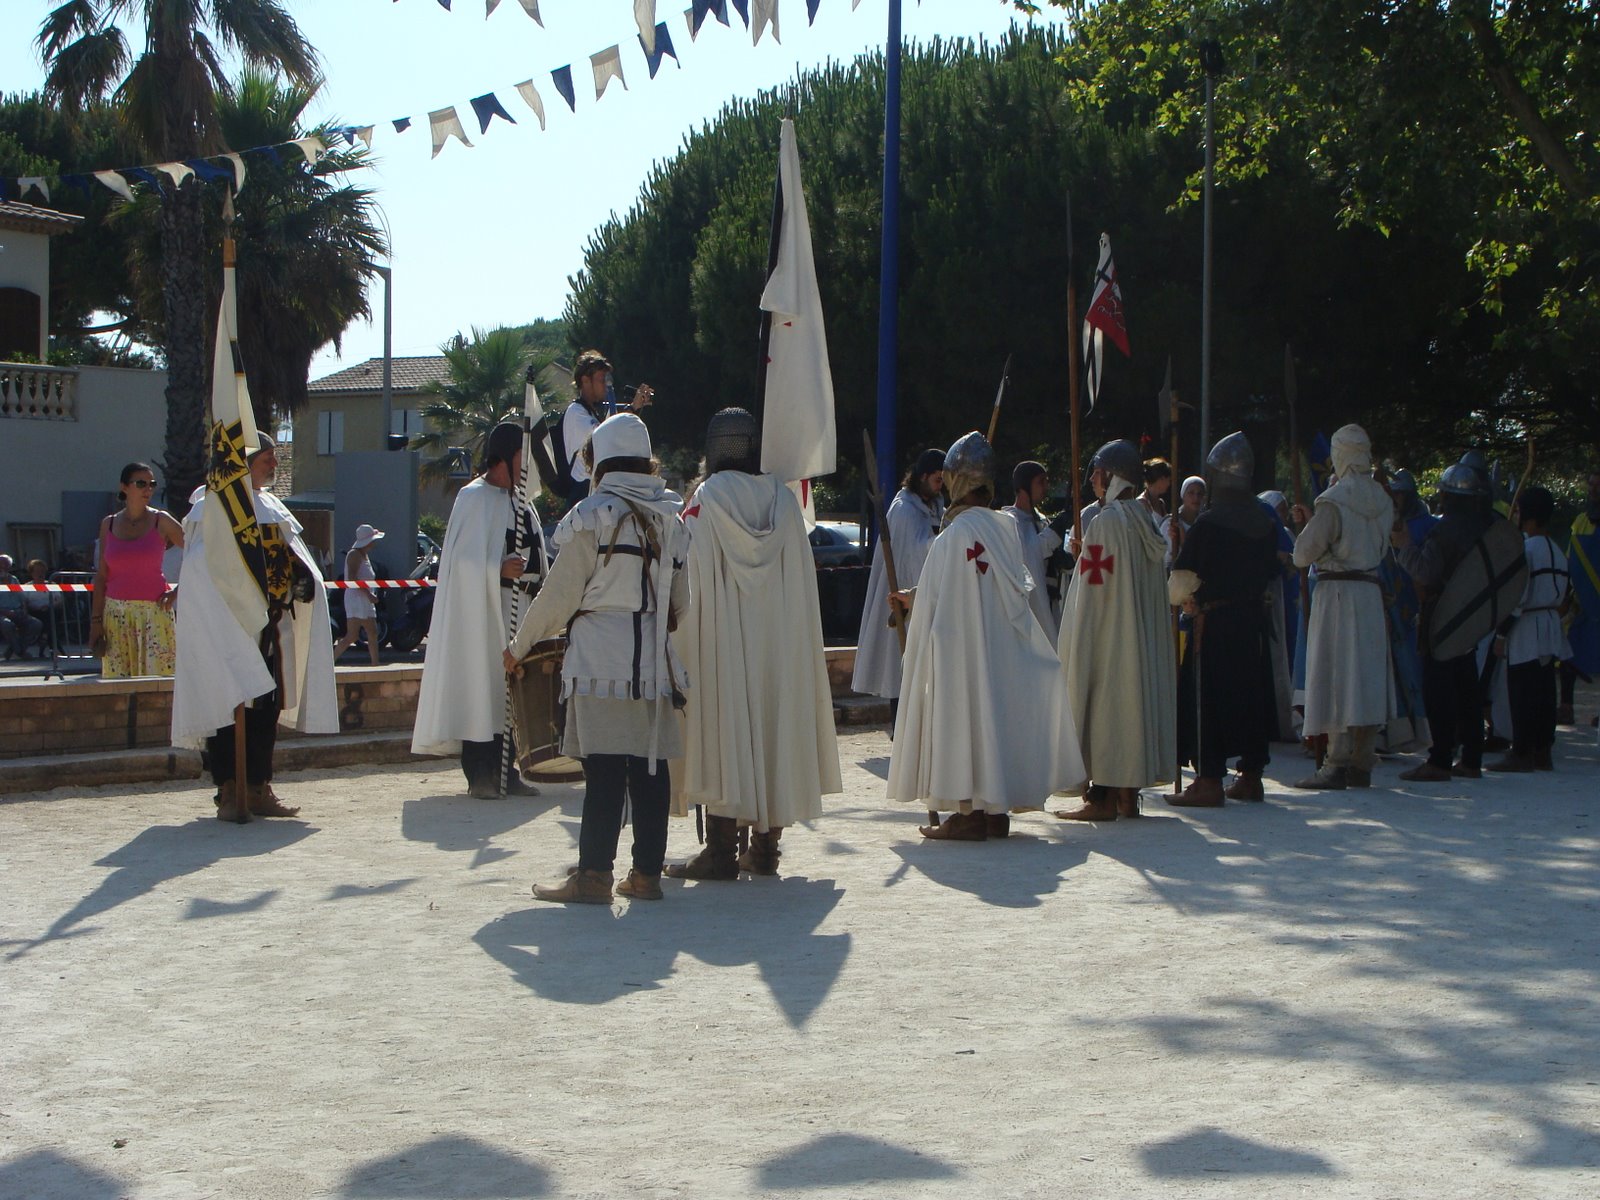 Parade in France 2